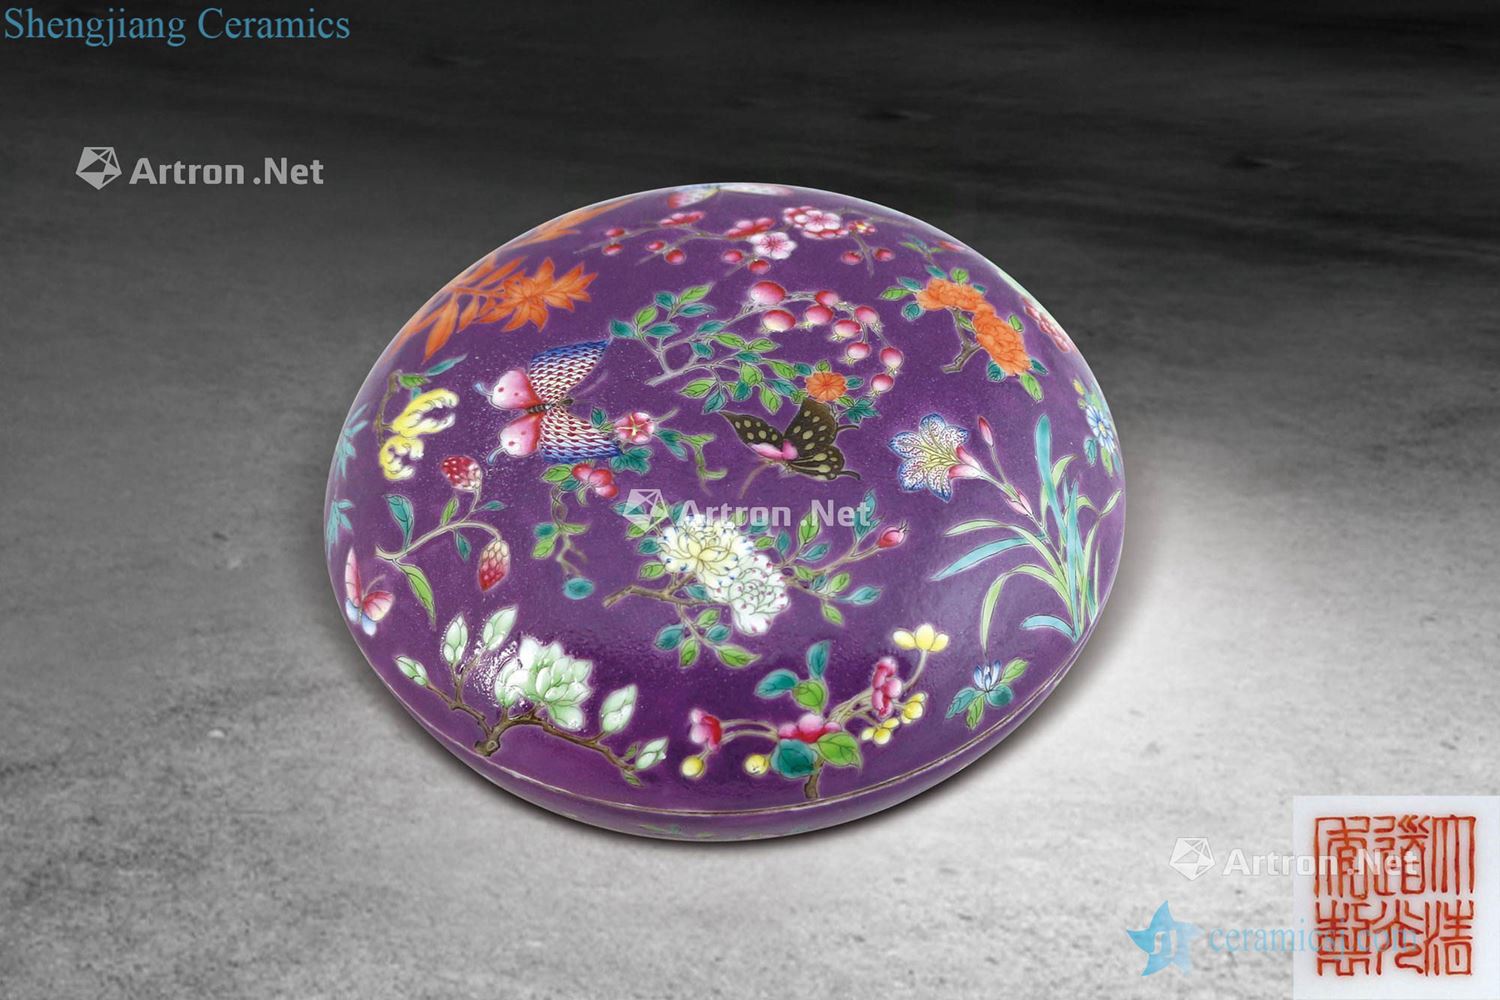 Qing to pastel flowers purple lines jewelry box